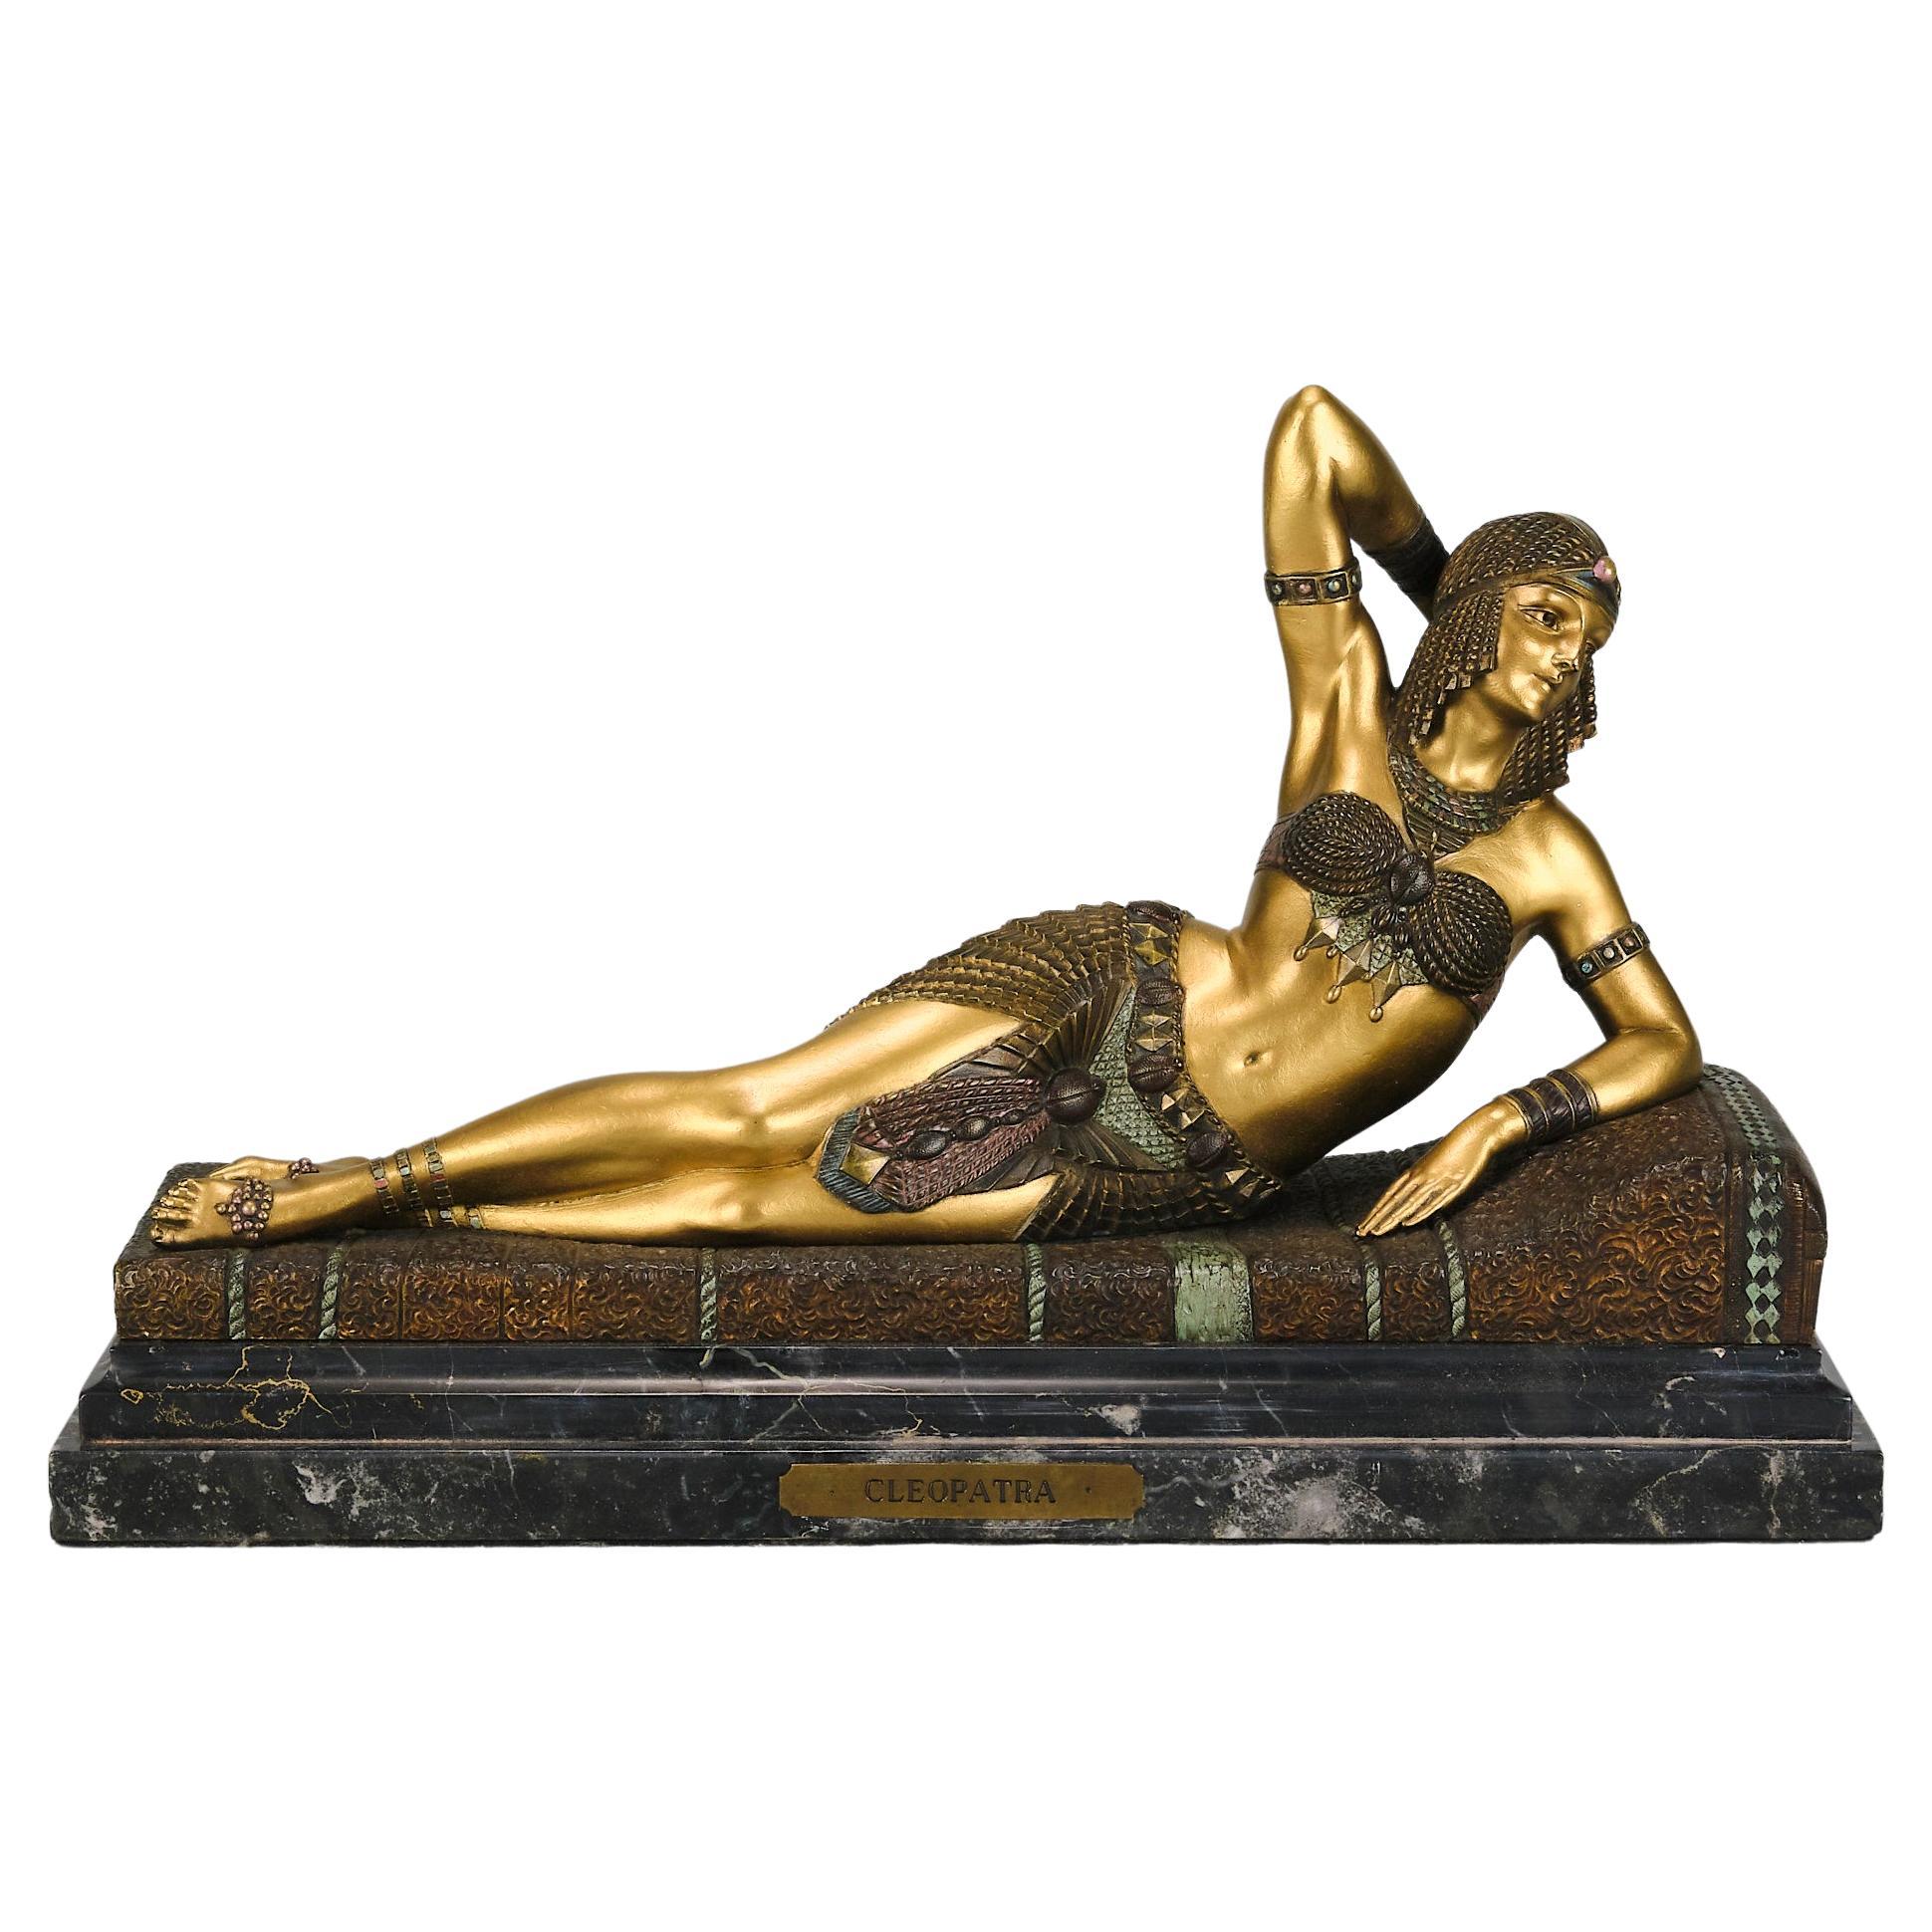 Early 20th Century Bronze Entitled "Cleopatra" by Demetre Chiparus For Sale